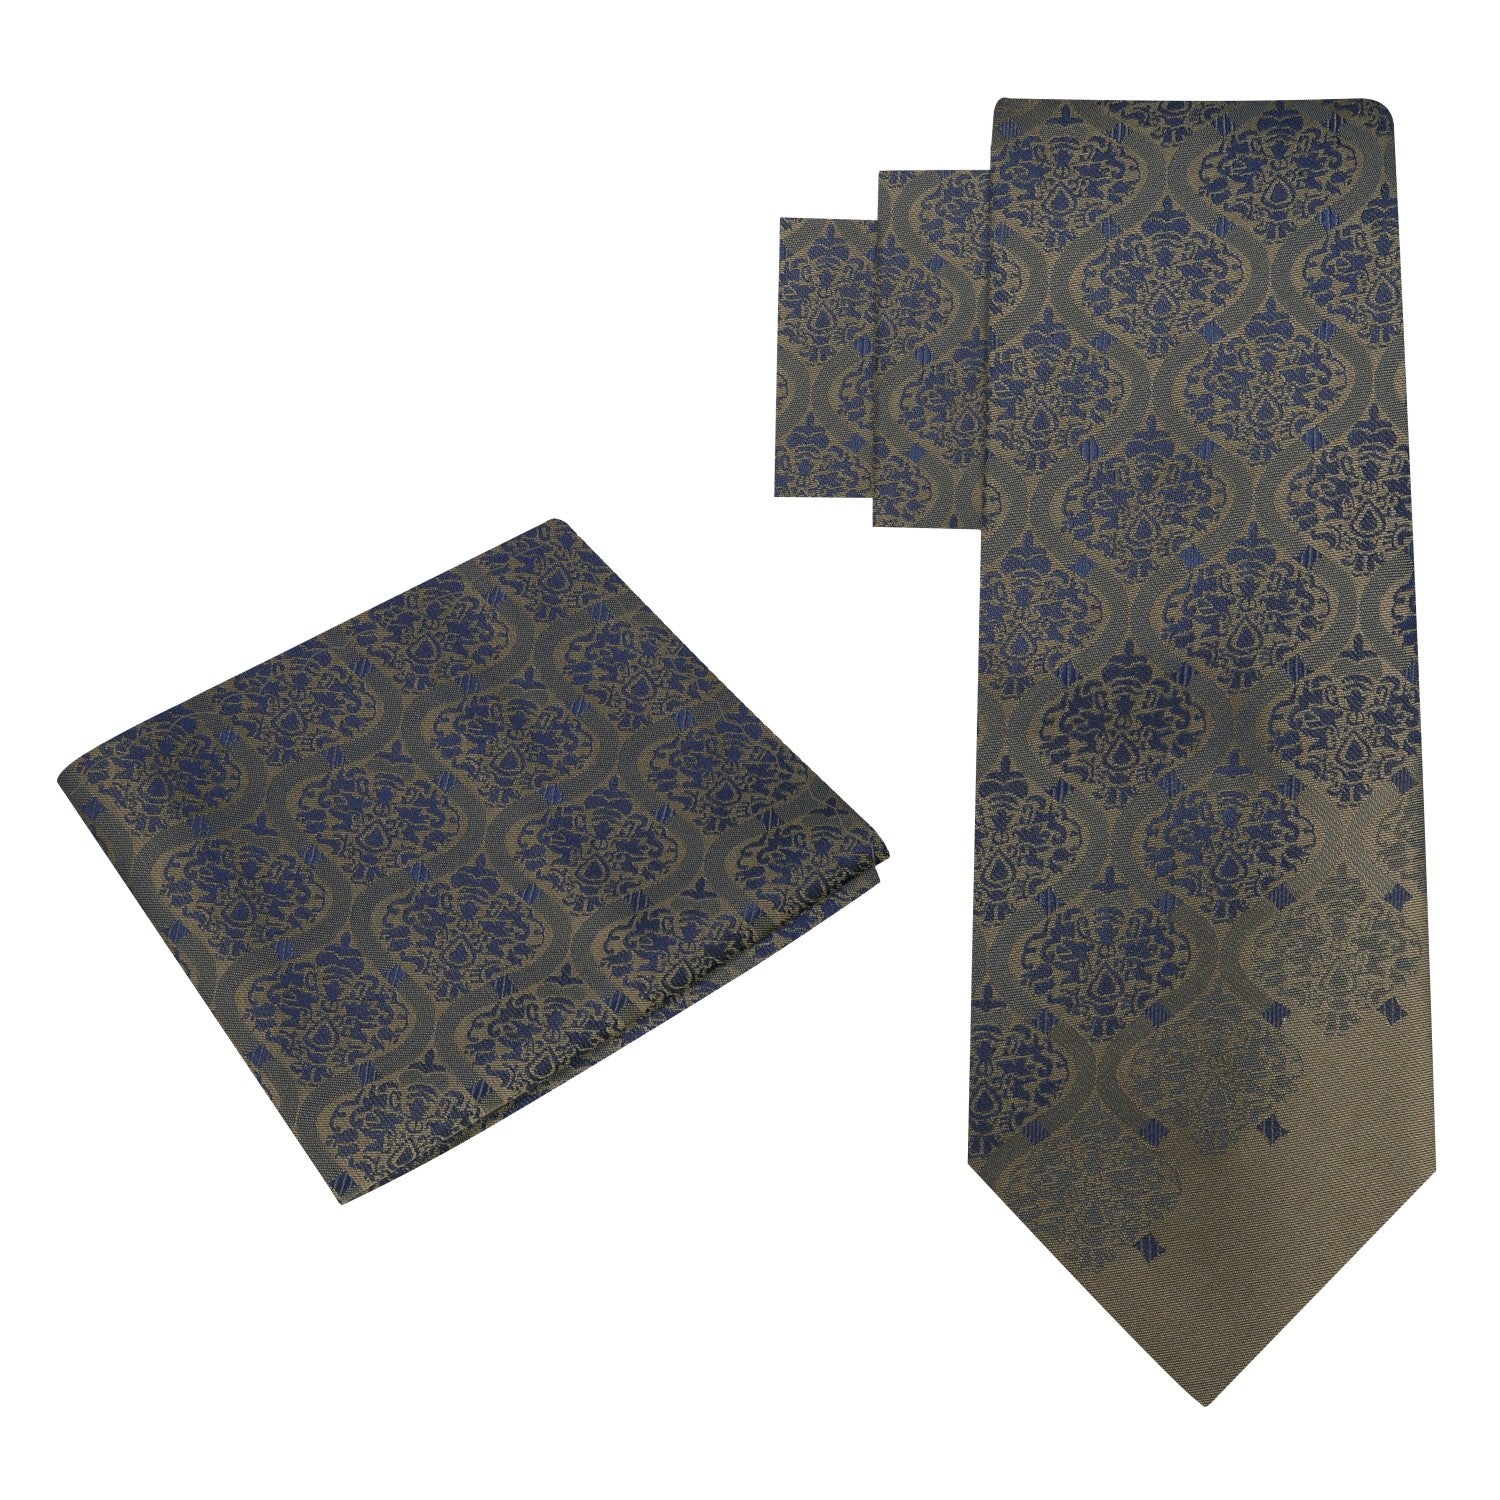 Alt View: Deep Olive Green, Deep Blue Abstract Tie and Pocket Square